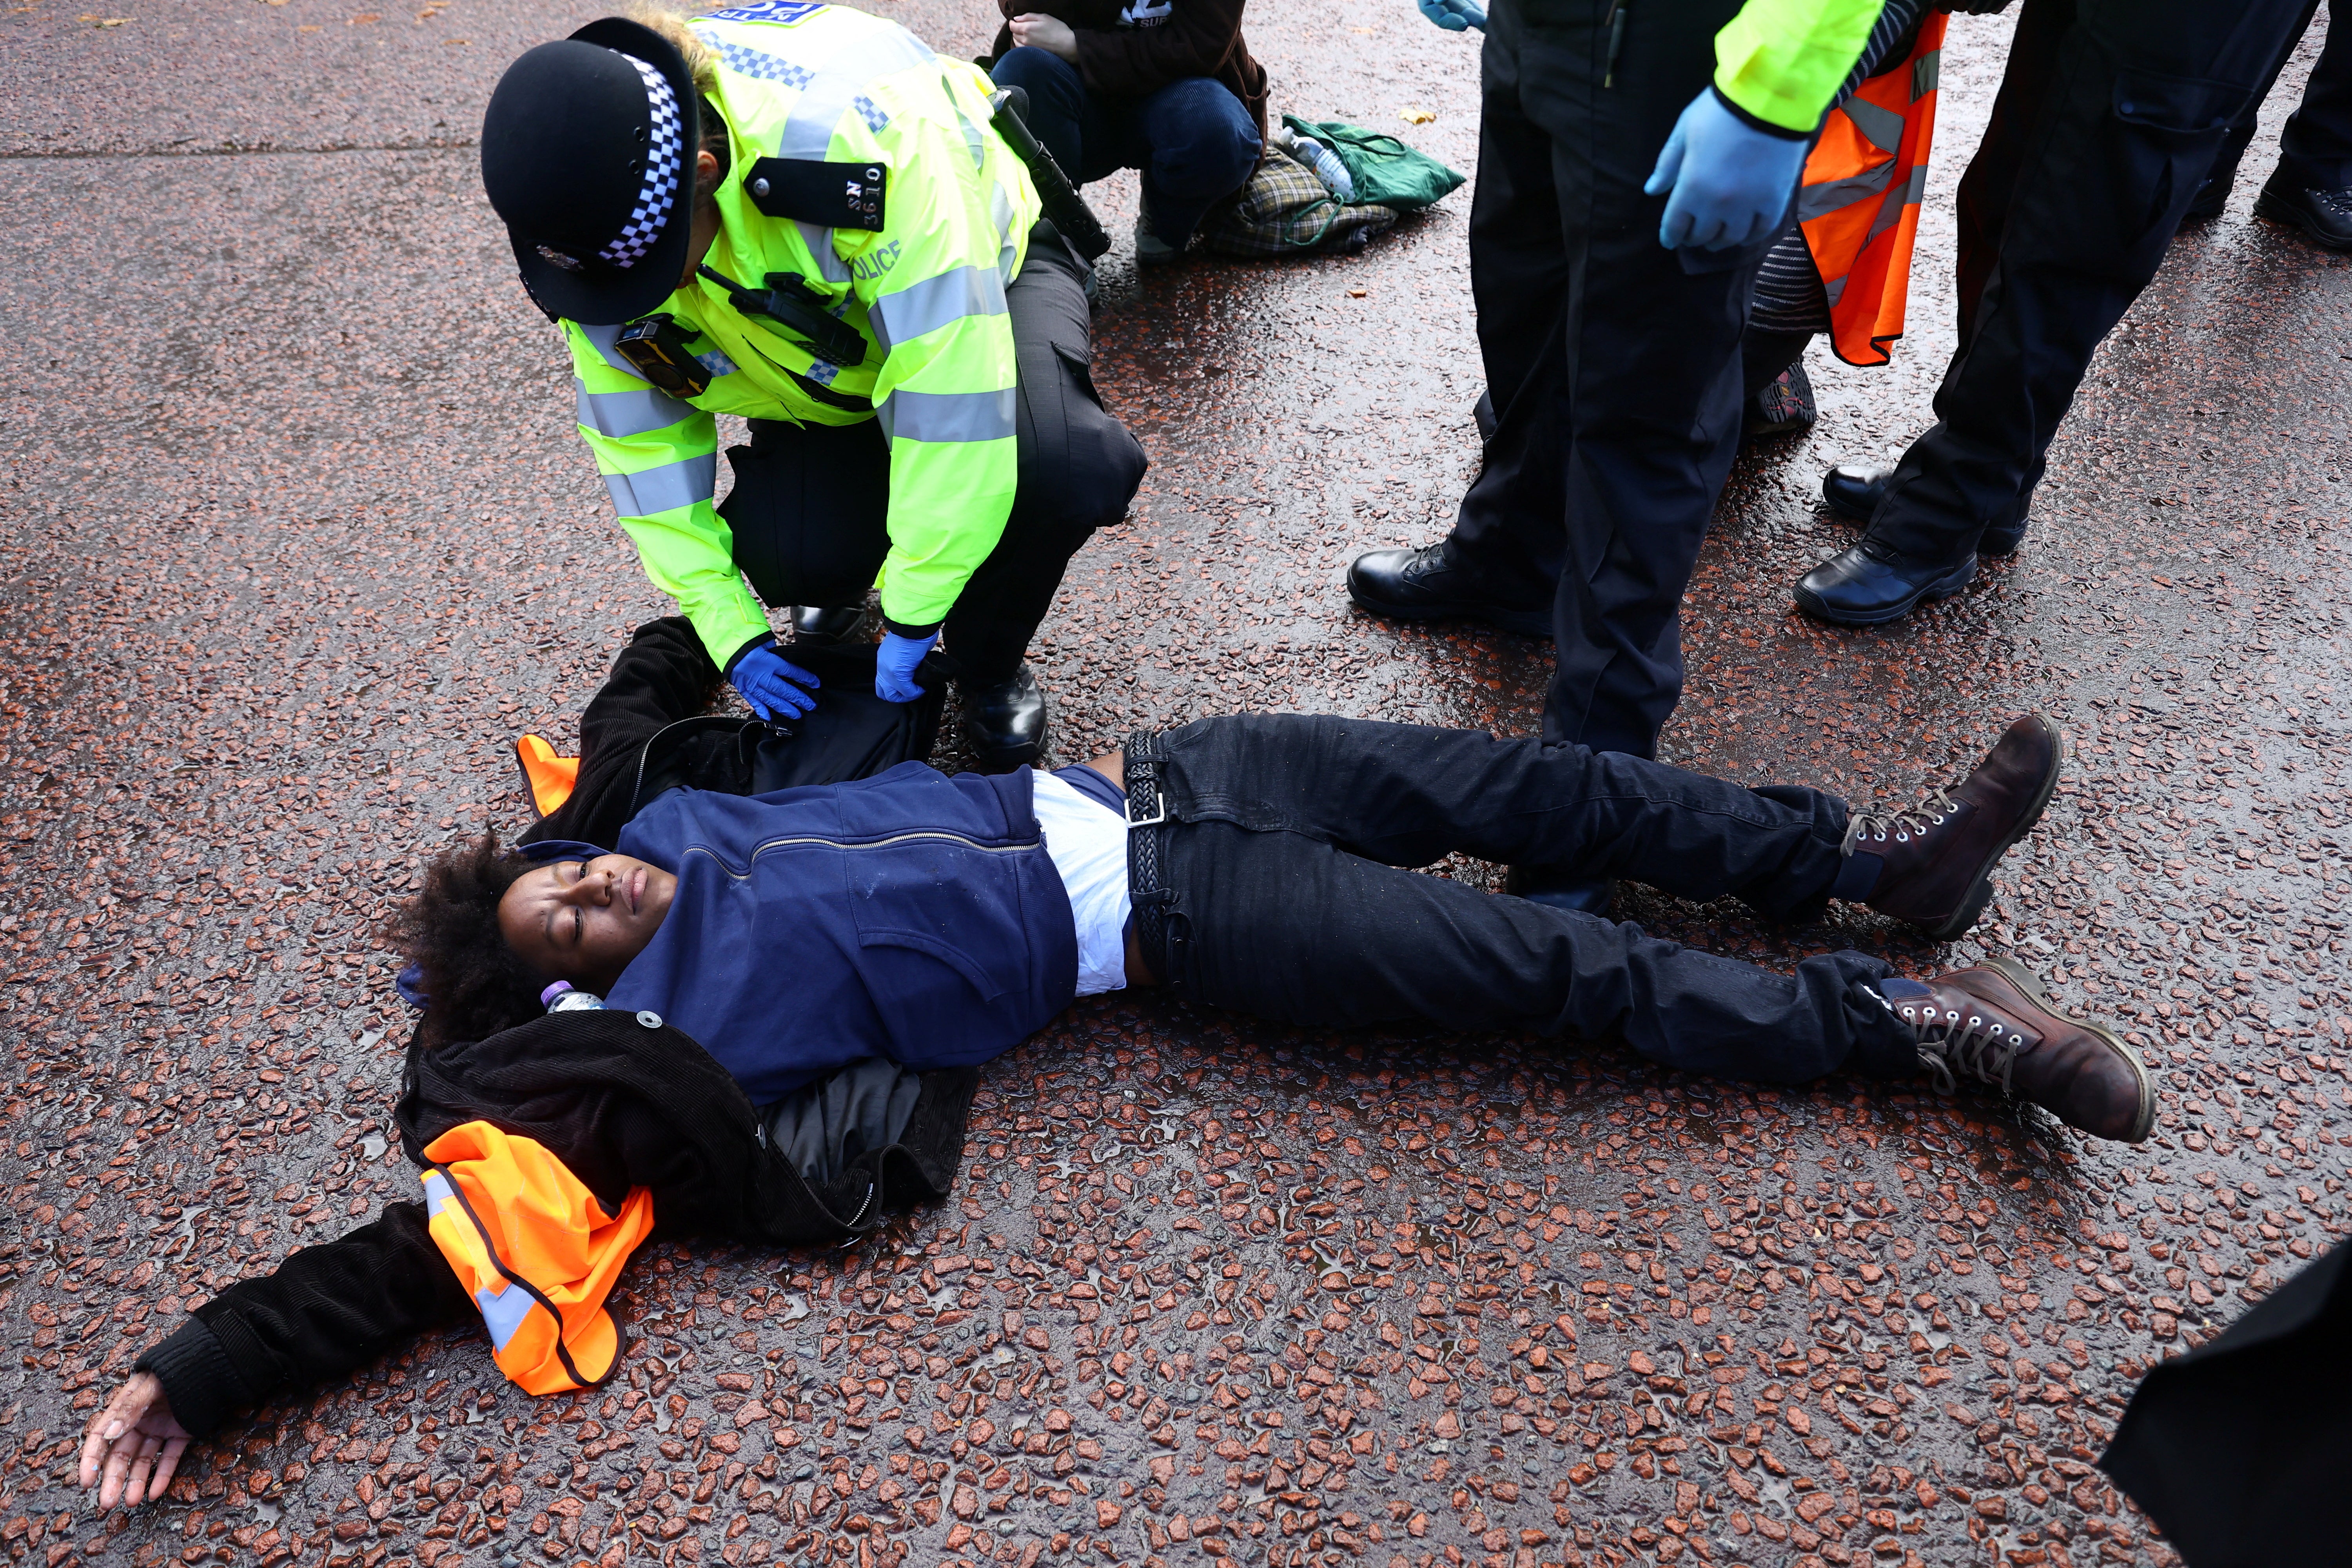 Police officers search and detain a demonstrator during a 'Just Stop Oil' protest outside Buckingham Palace